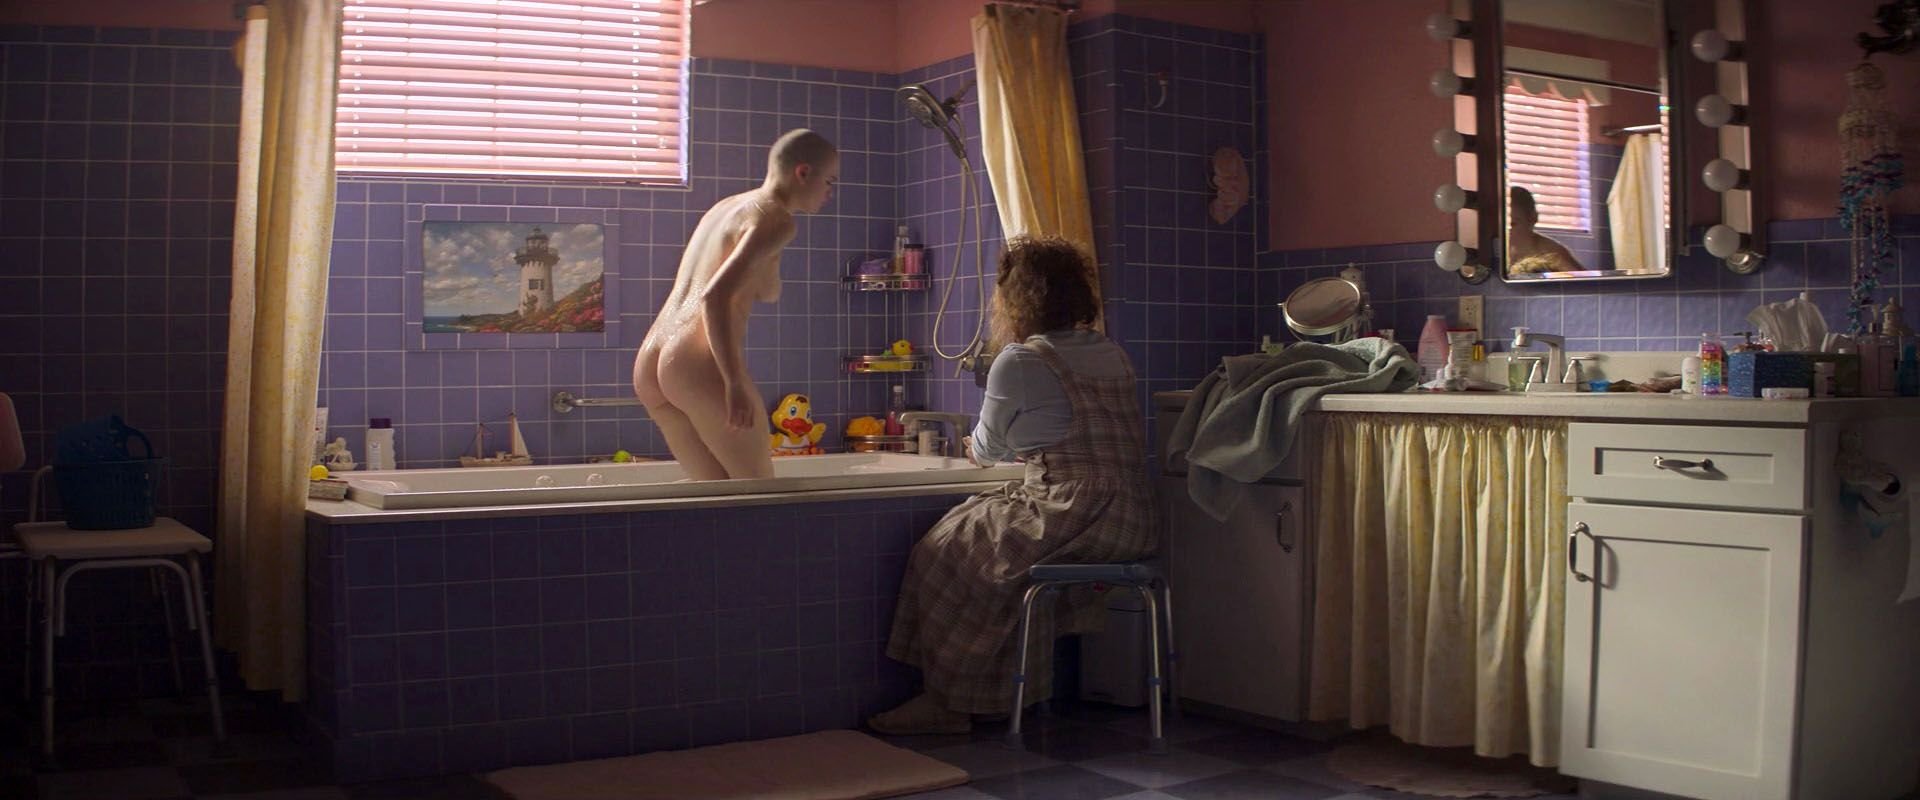 Joey King Nude - The Act (10 Pics + GIFs & Video)